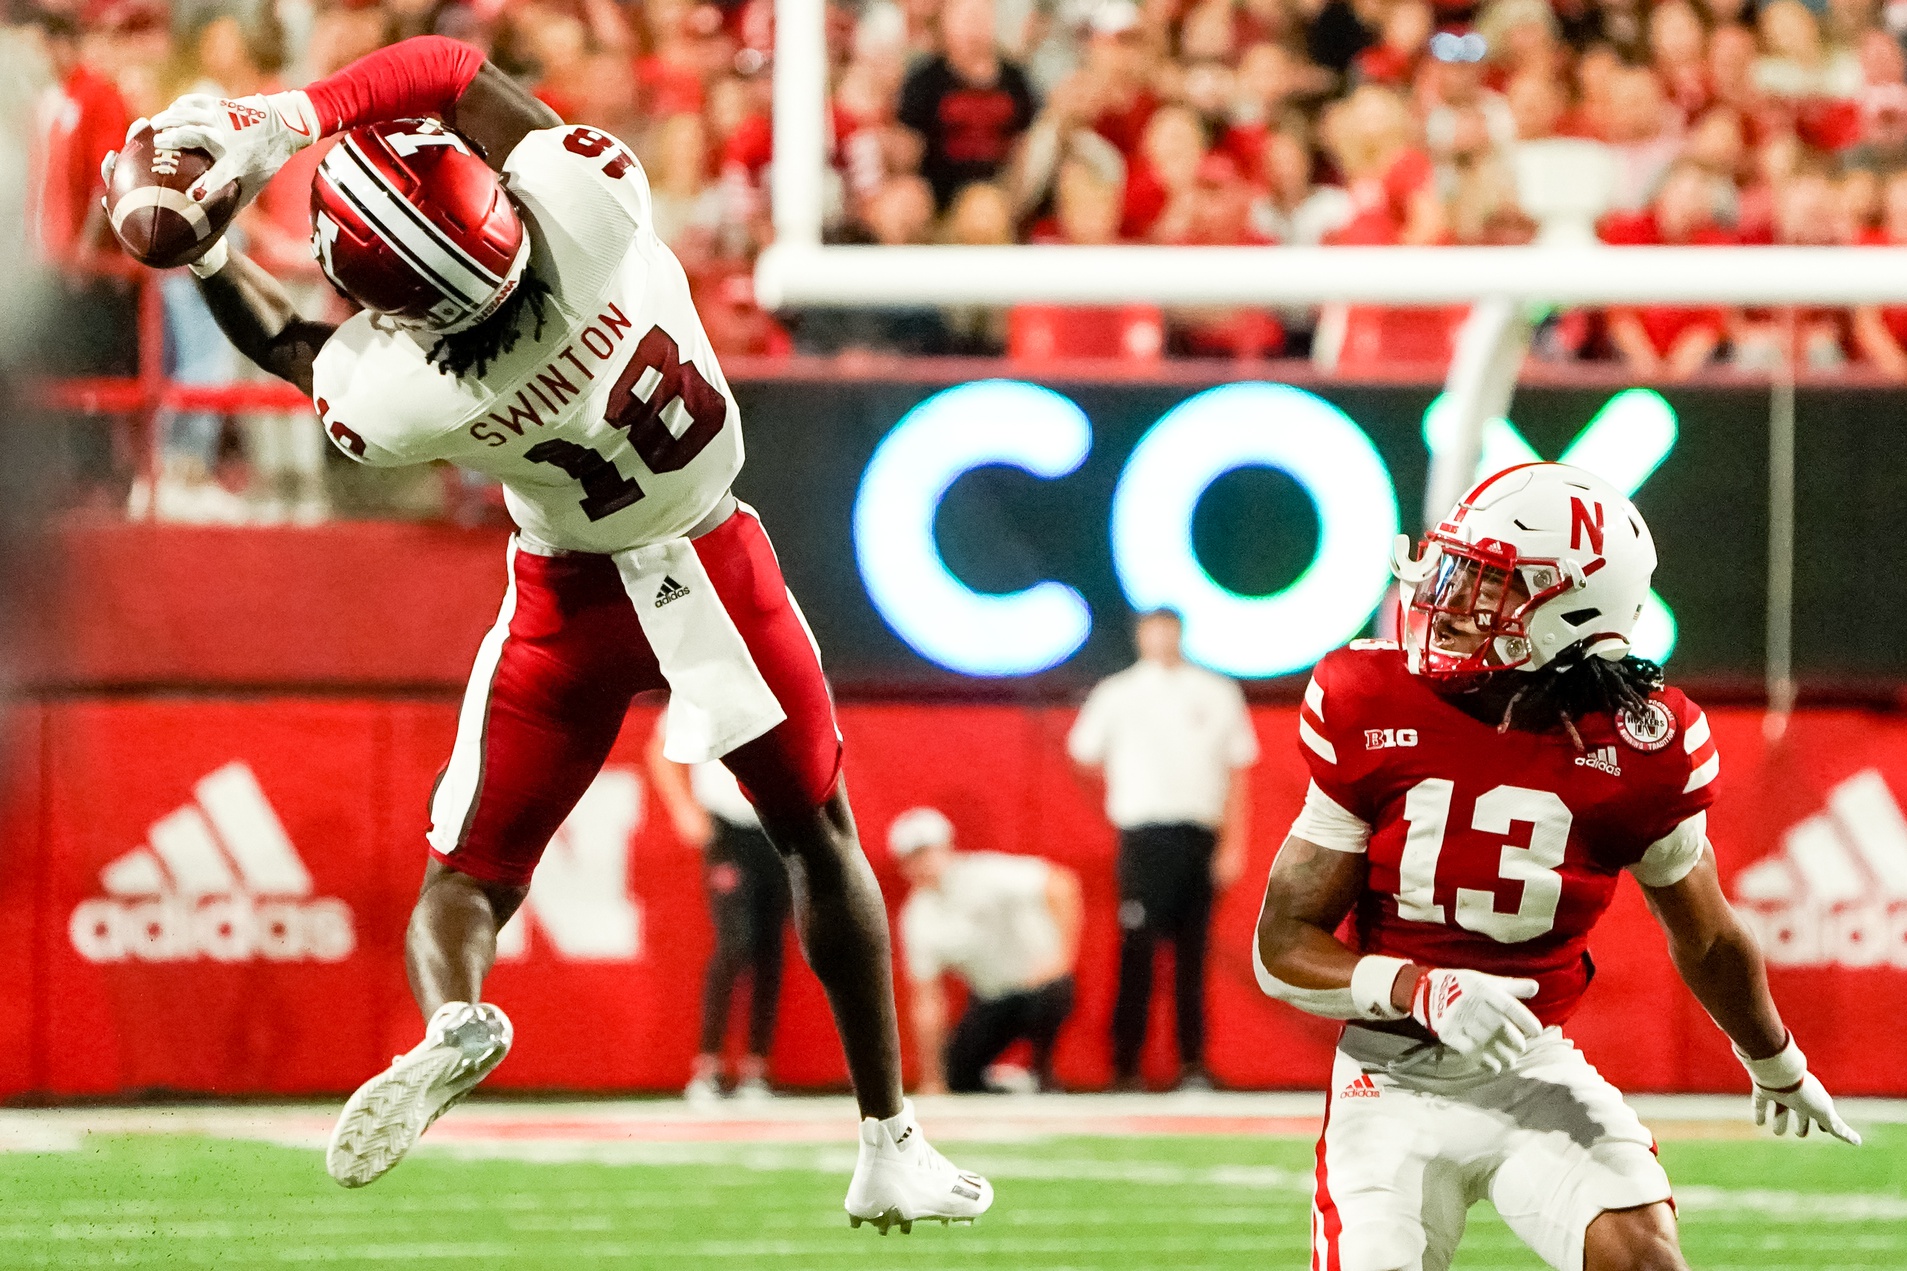 Indiana Hoosiers wide receiver Javon Swinton (18) catches a pass against Nebraska Cornhuskers defensive back Malcolm Hartzog (13) during the second quarter at Memorial Stadium